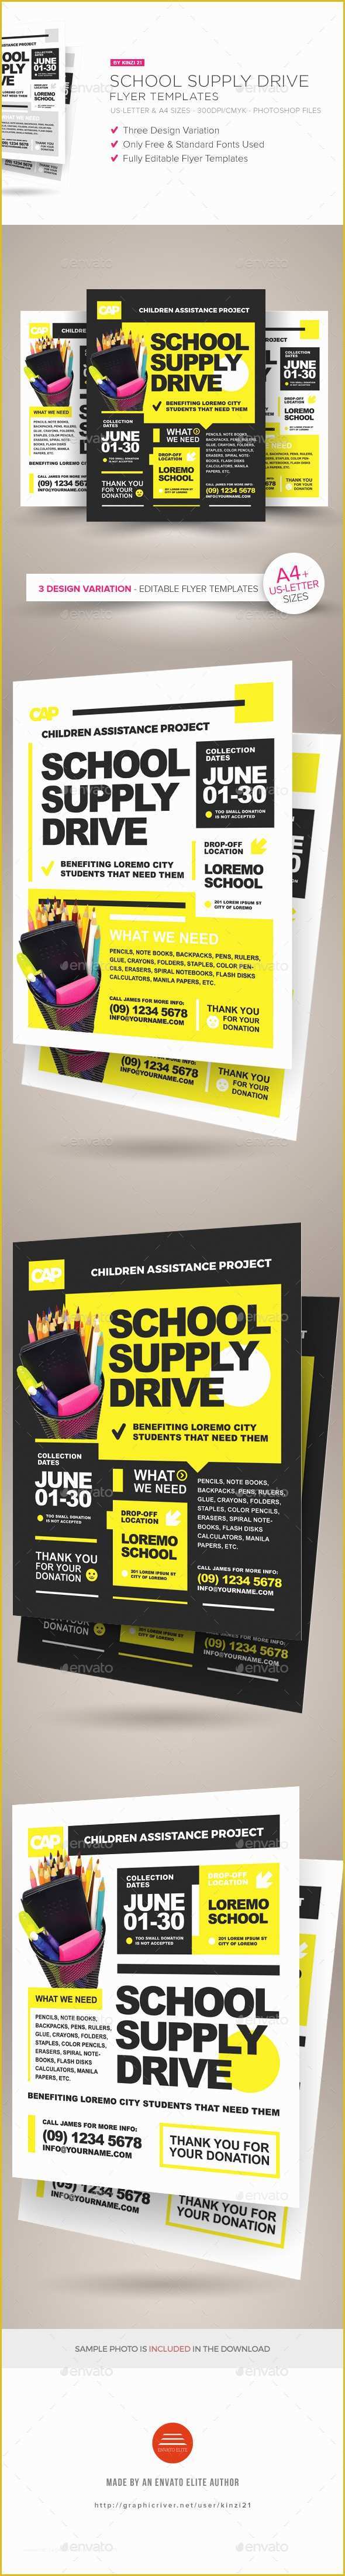 Free School Supply Drive Flyer Template Of School Supply Drive Flyer Templates by Kinzi21